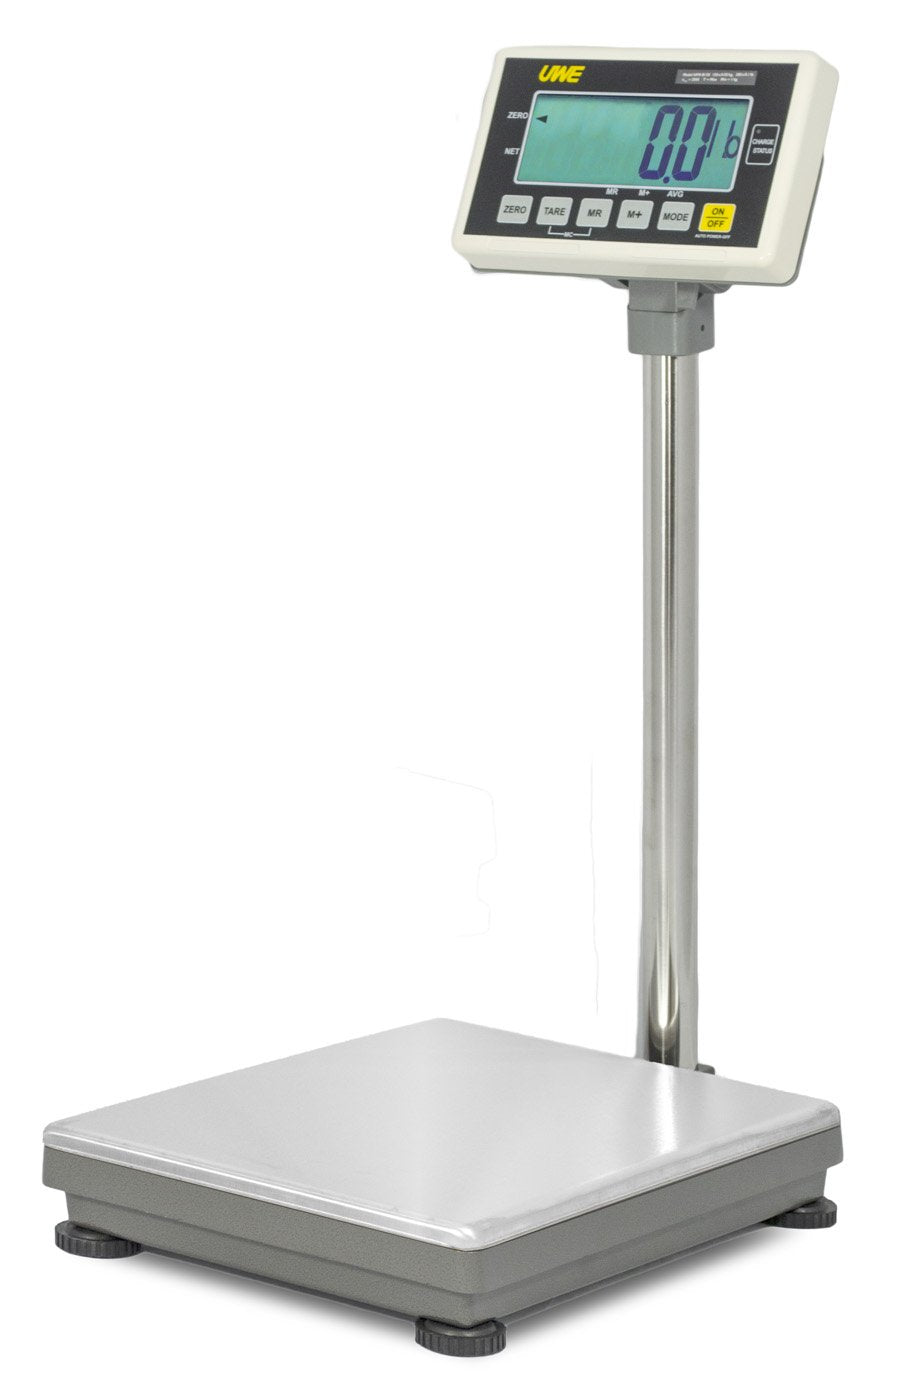 Intelligent Weighing UFM-B30 UFM Series Industrial Bench Scale, 30000 g Capacity, 10 g Readability